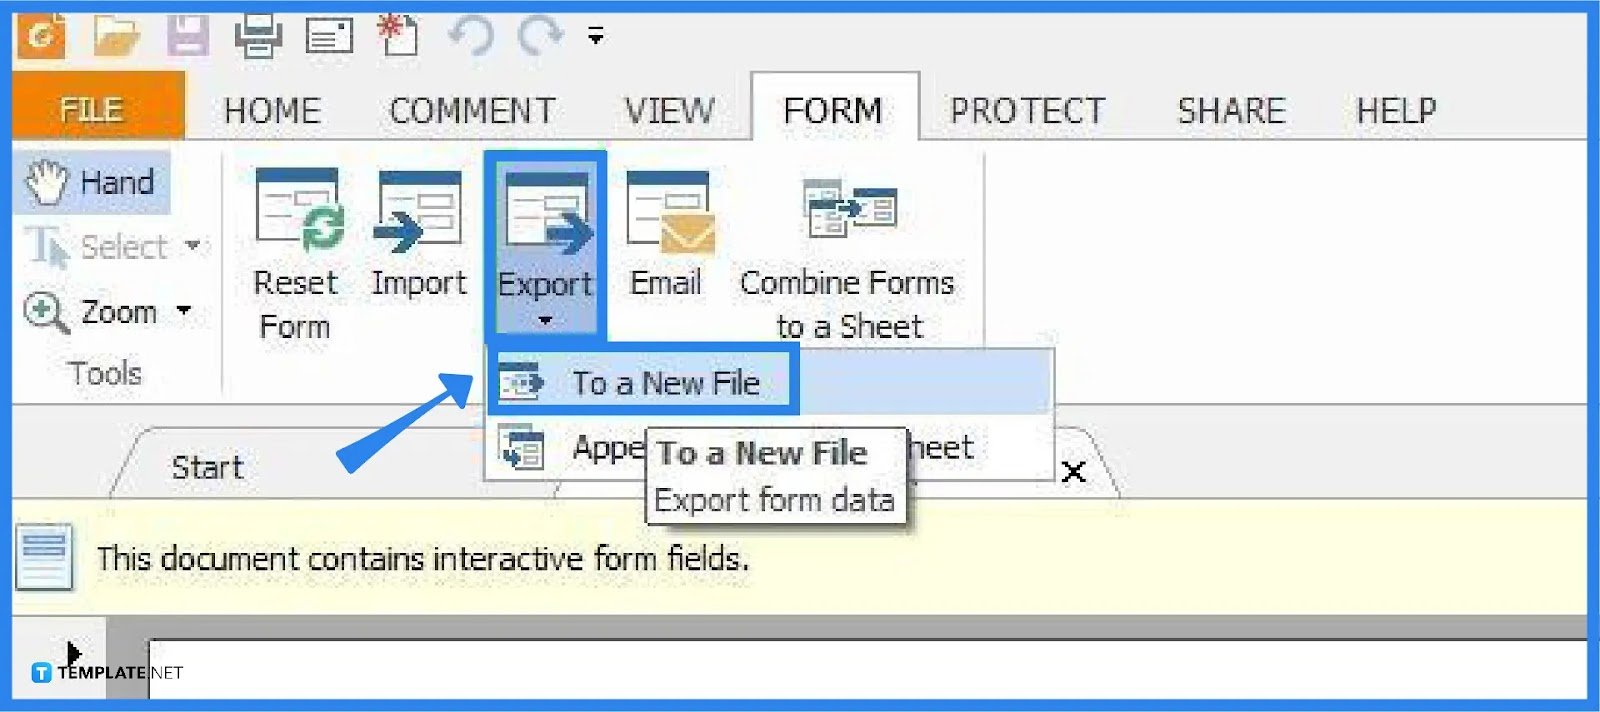 how-to-automatically-fill-pdf-forms-using-microsoft-excel-templates